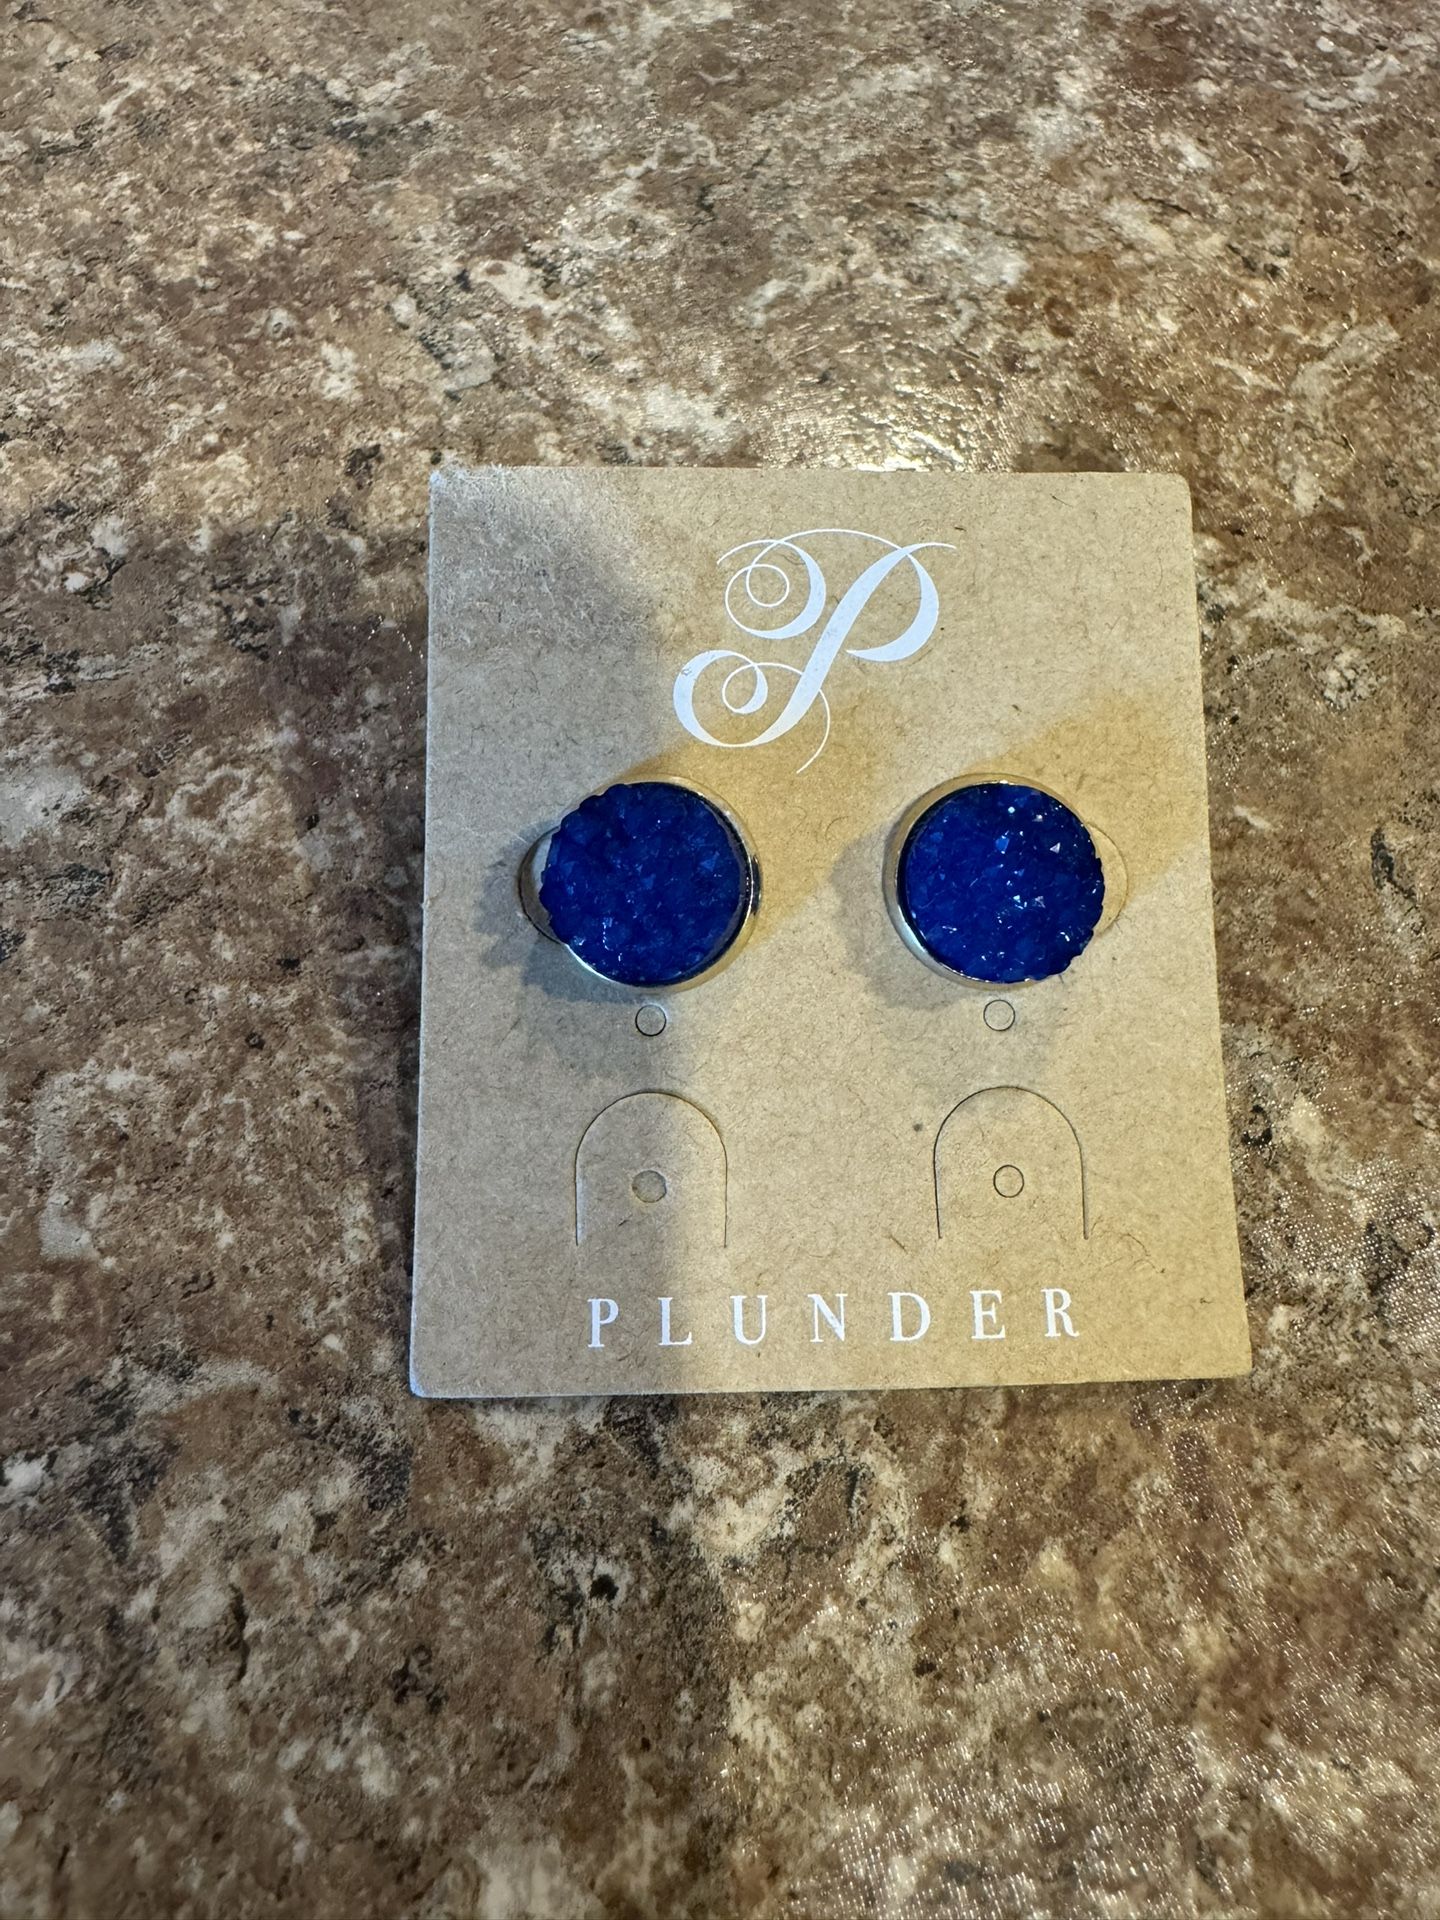 New Plunder Design Earrings Shipping Avaialbe 